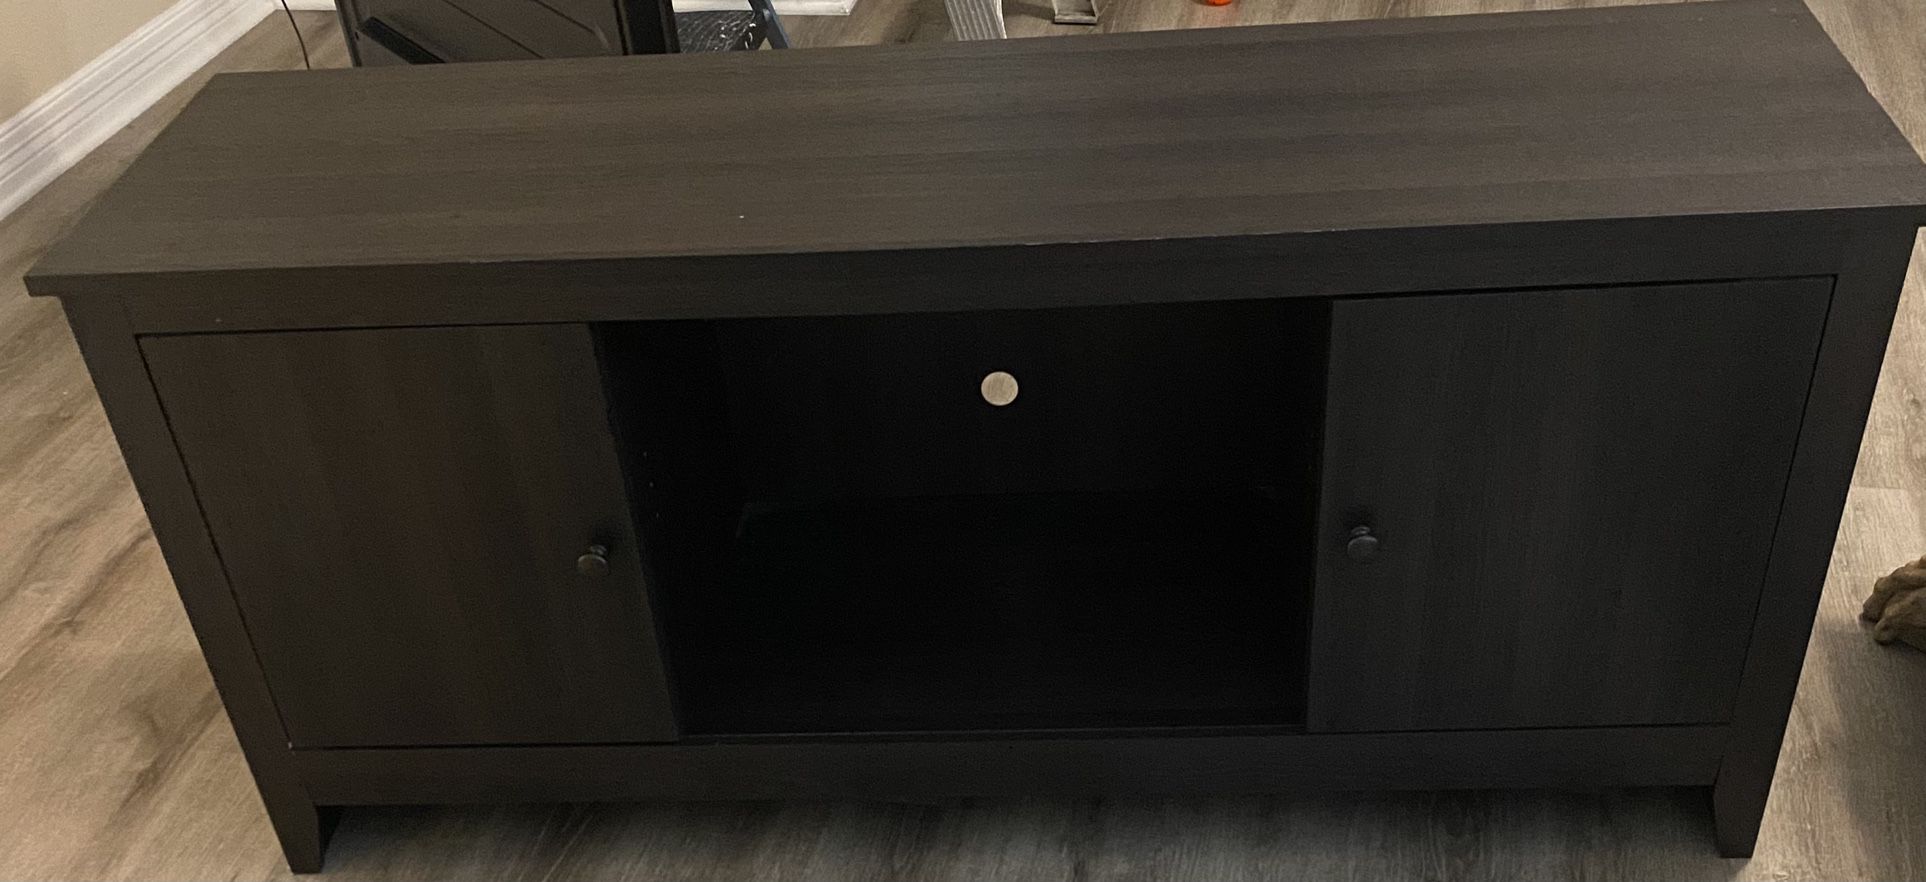 TV Stand Holds Up To 65 Inch Tv